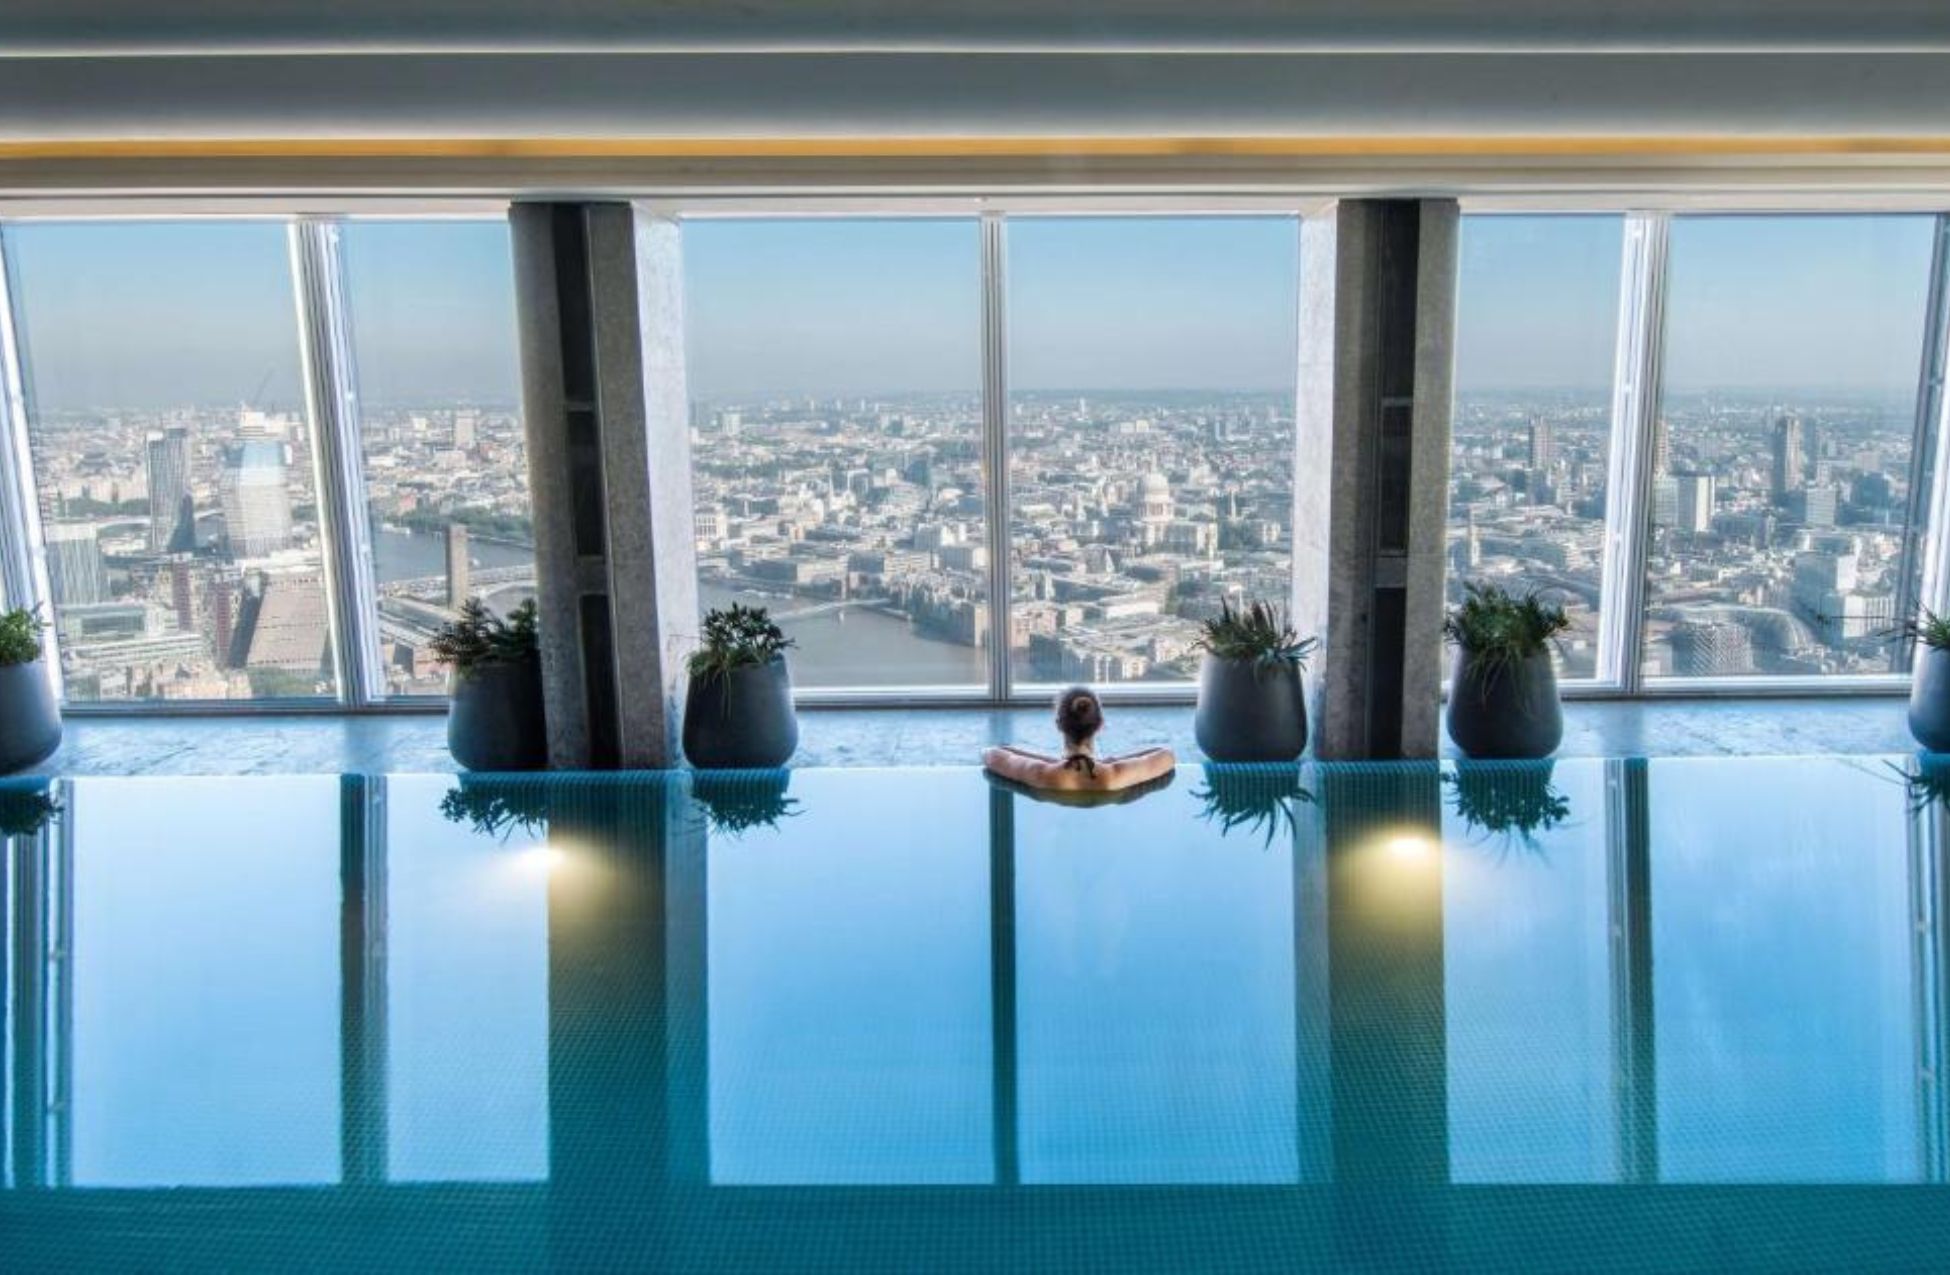 Shangri-La At The Shard - Best Hotels In London